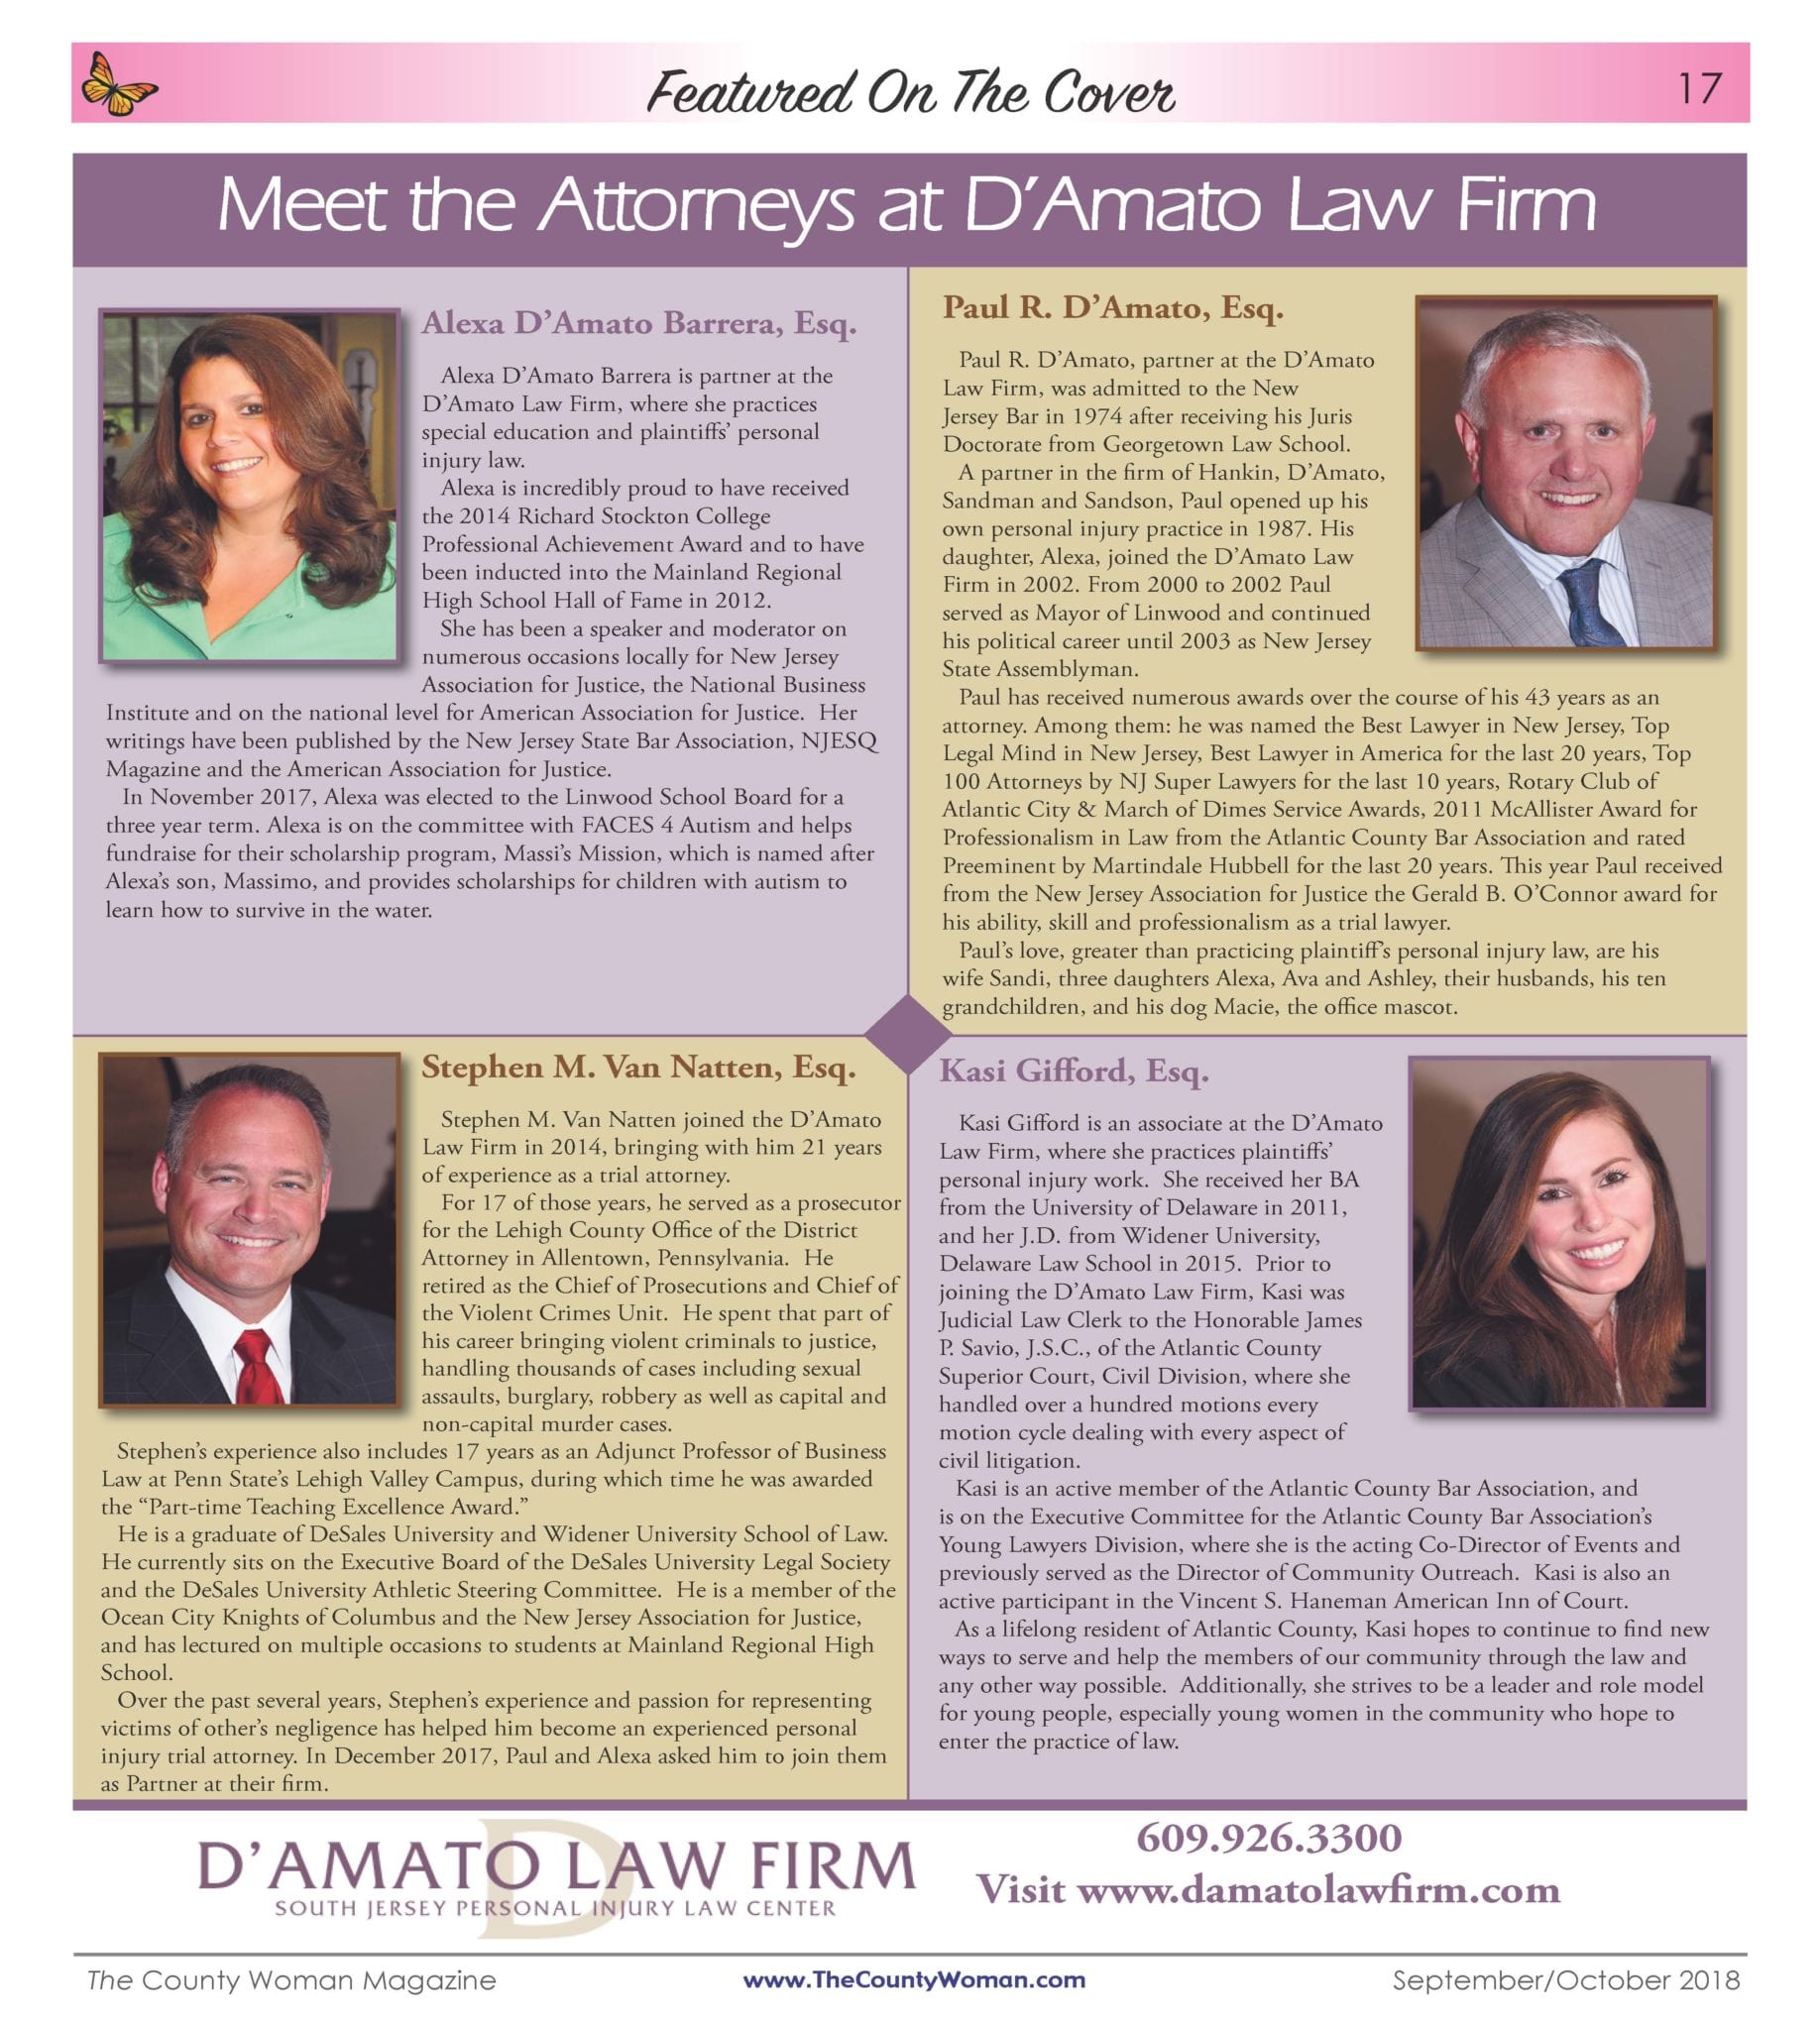 D’Amato Law Firm Featured on the Cover of Atlantic County Woman